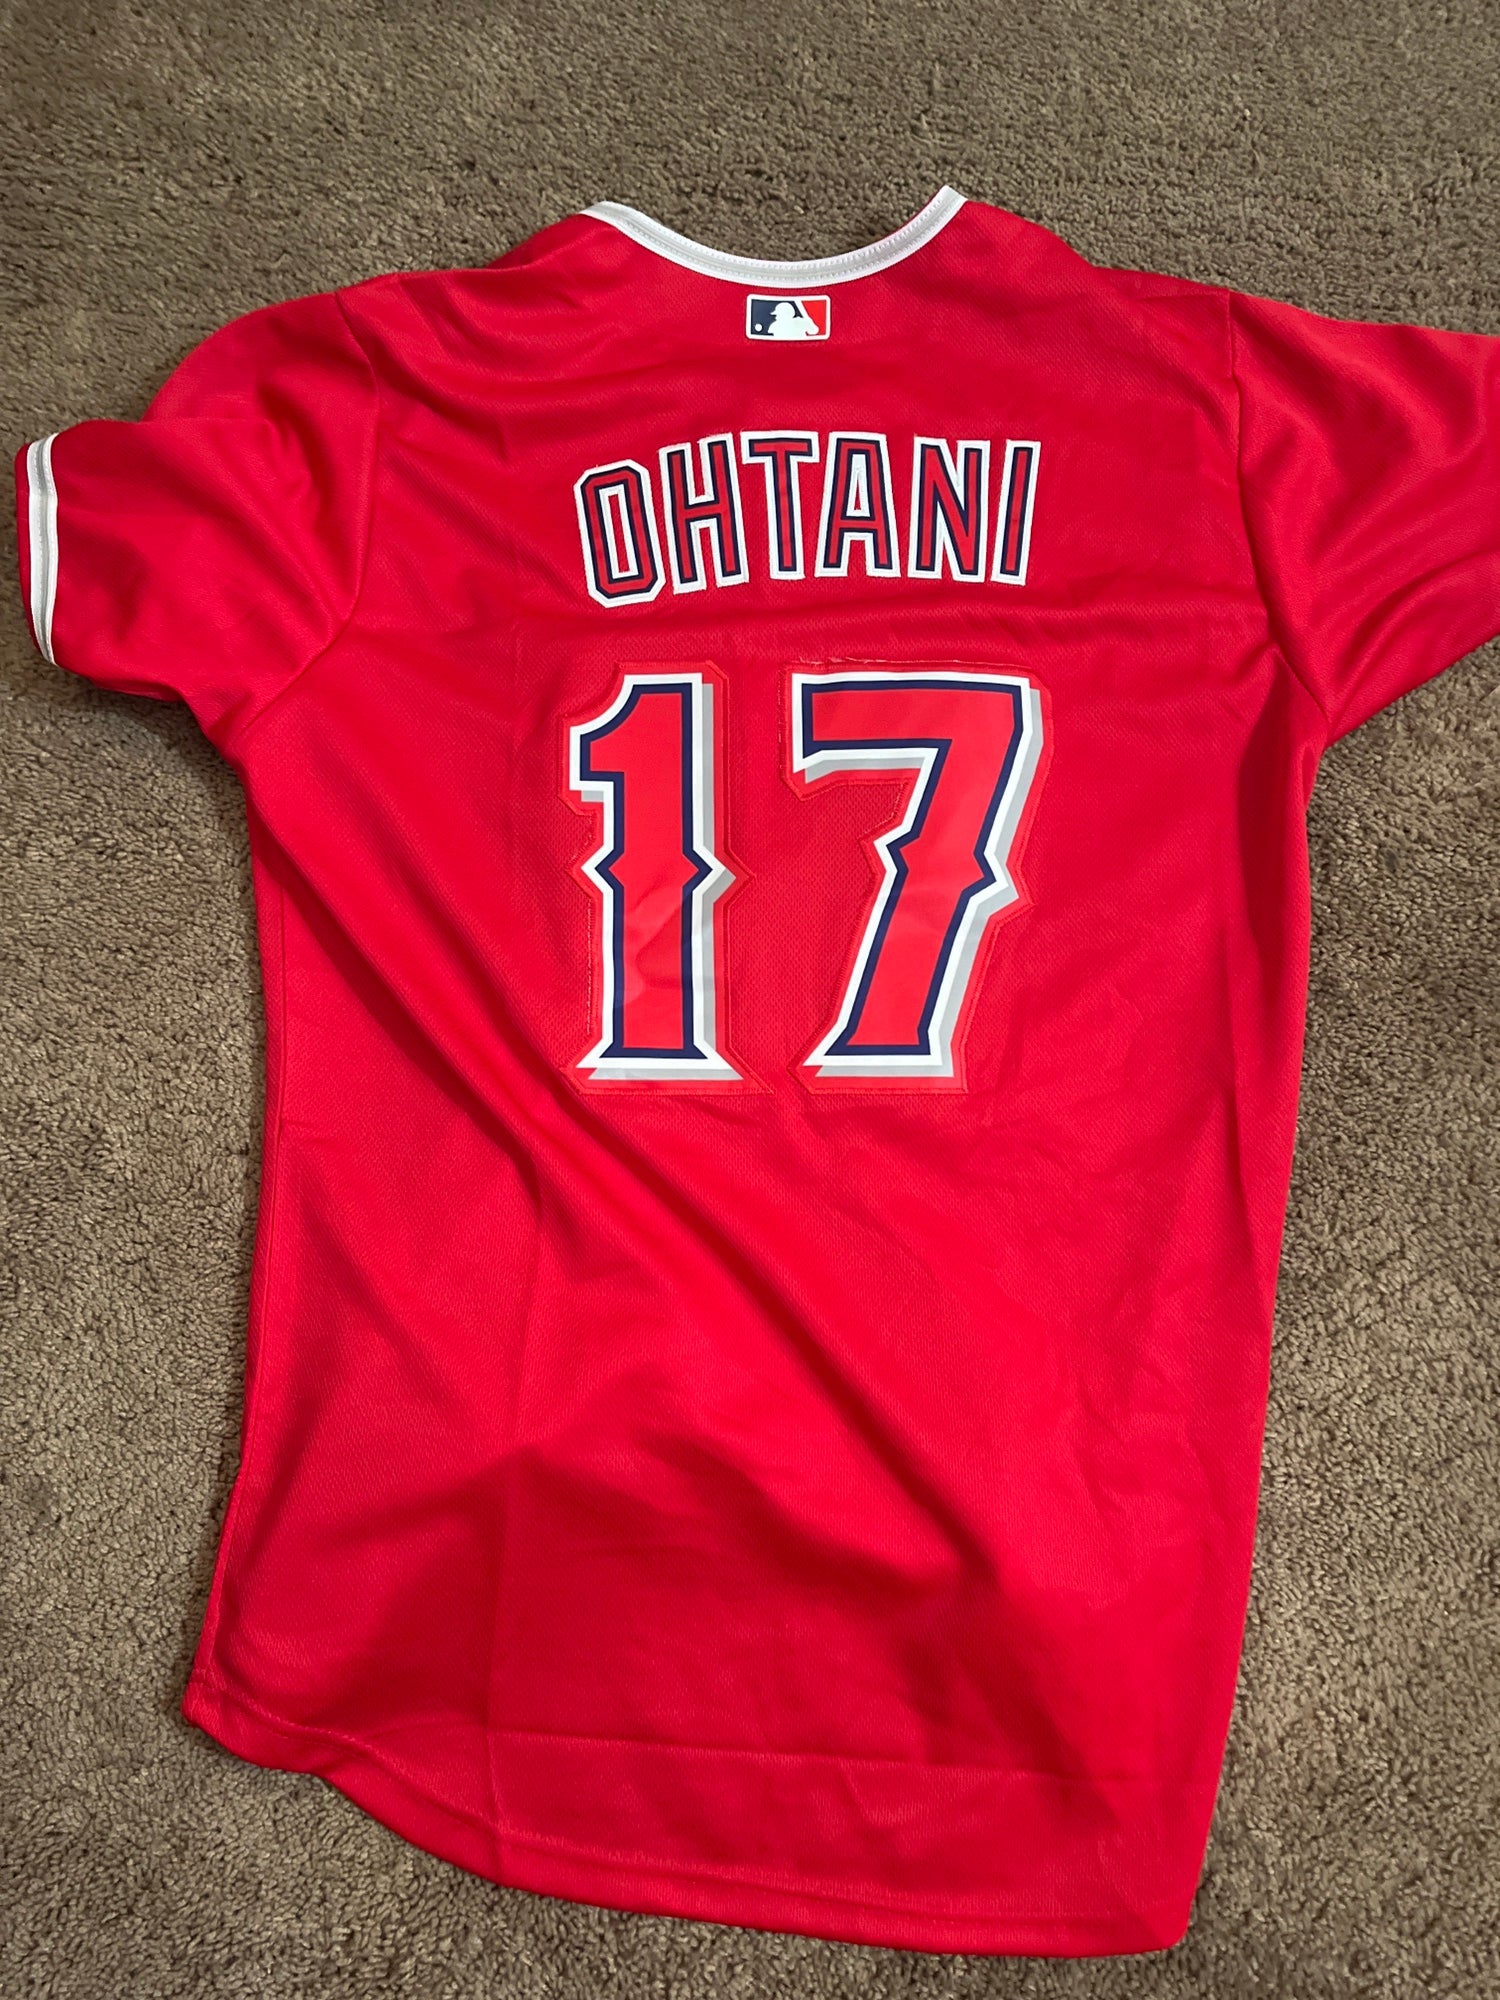 New Nike Shohei Ohtani Jersey In Adult Small